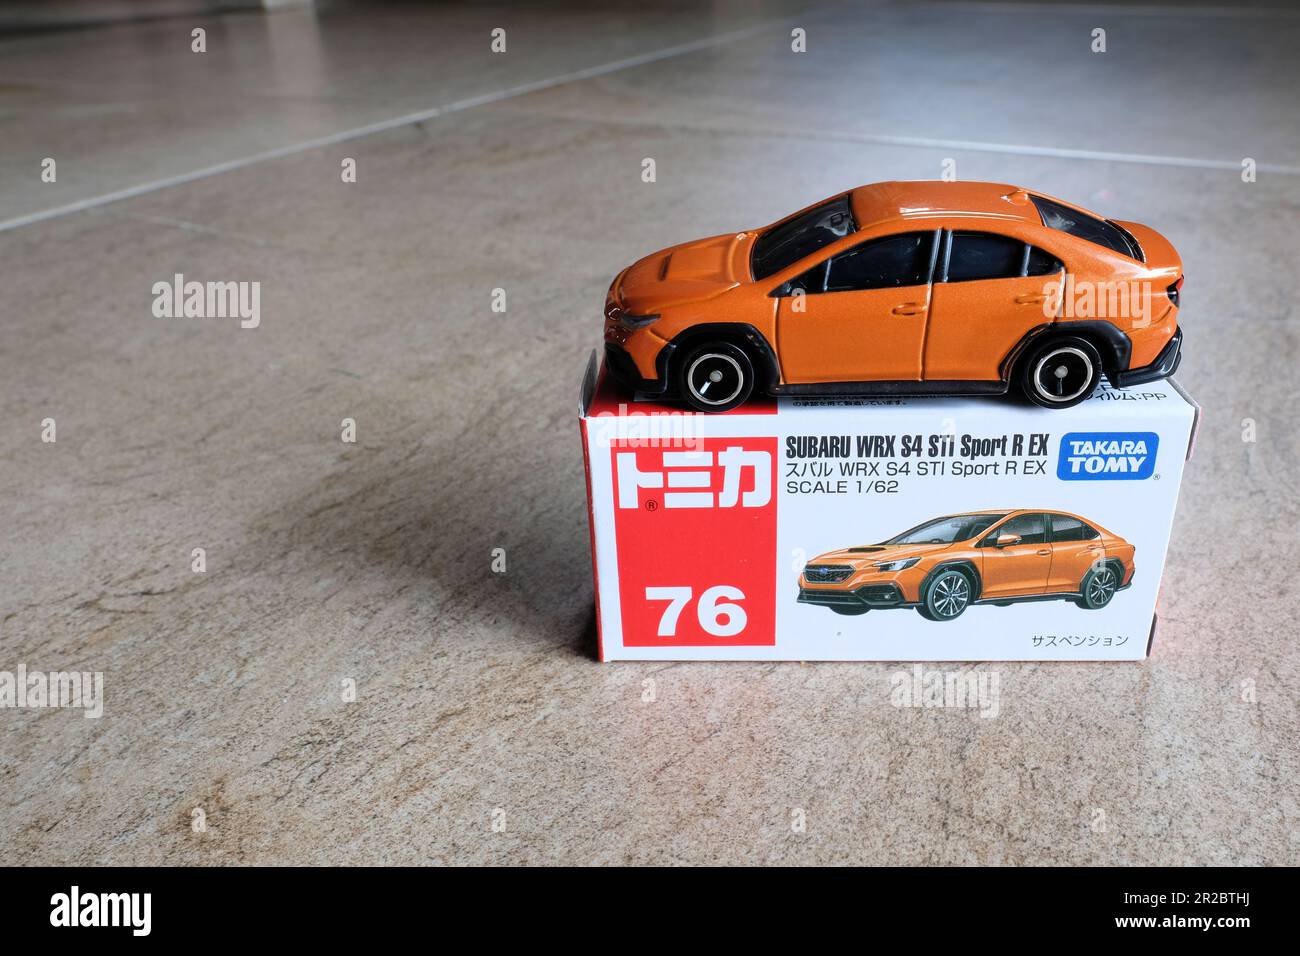 Tomica Takara Tomy #76 Subaru WRX S4 STI Sport R EX Brown Model Car Diecast with package box; toy car; made in Vietnam; Tomy Corporation of Japan. Stock Photo